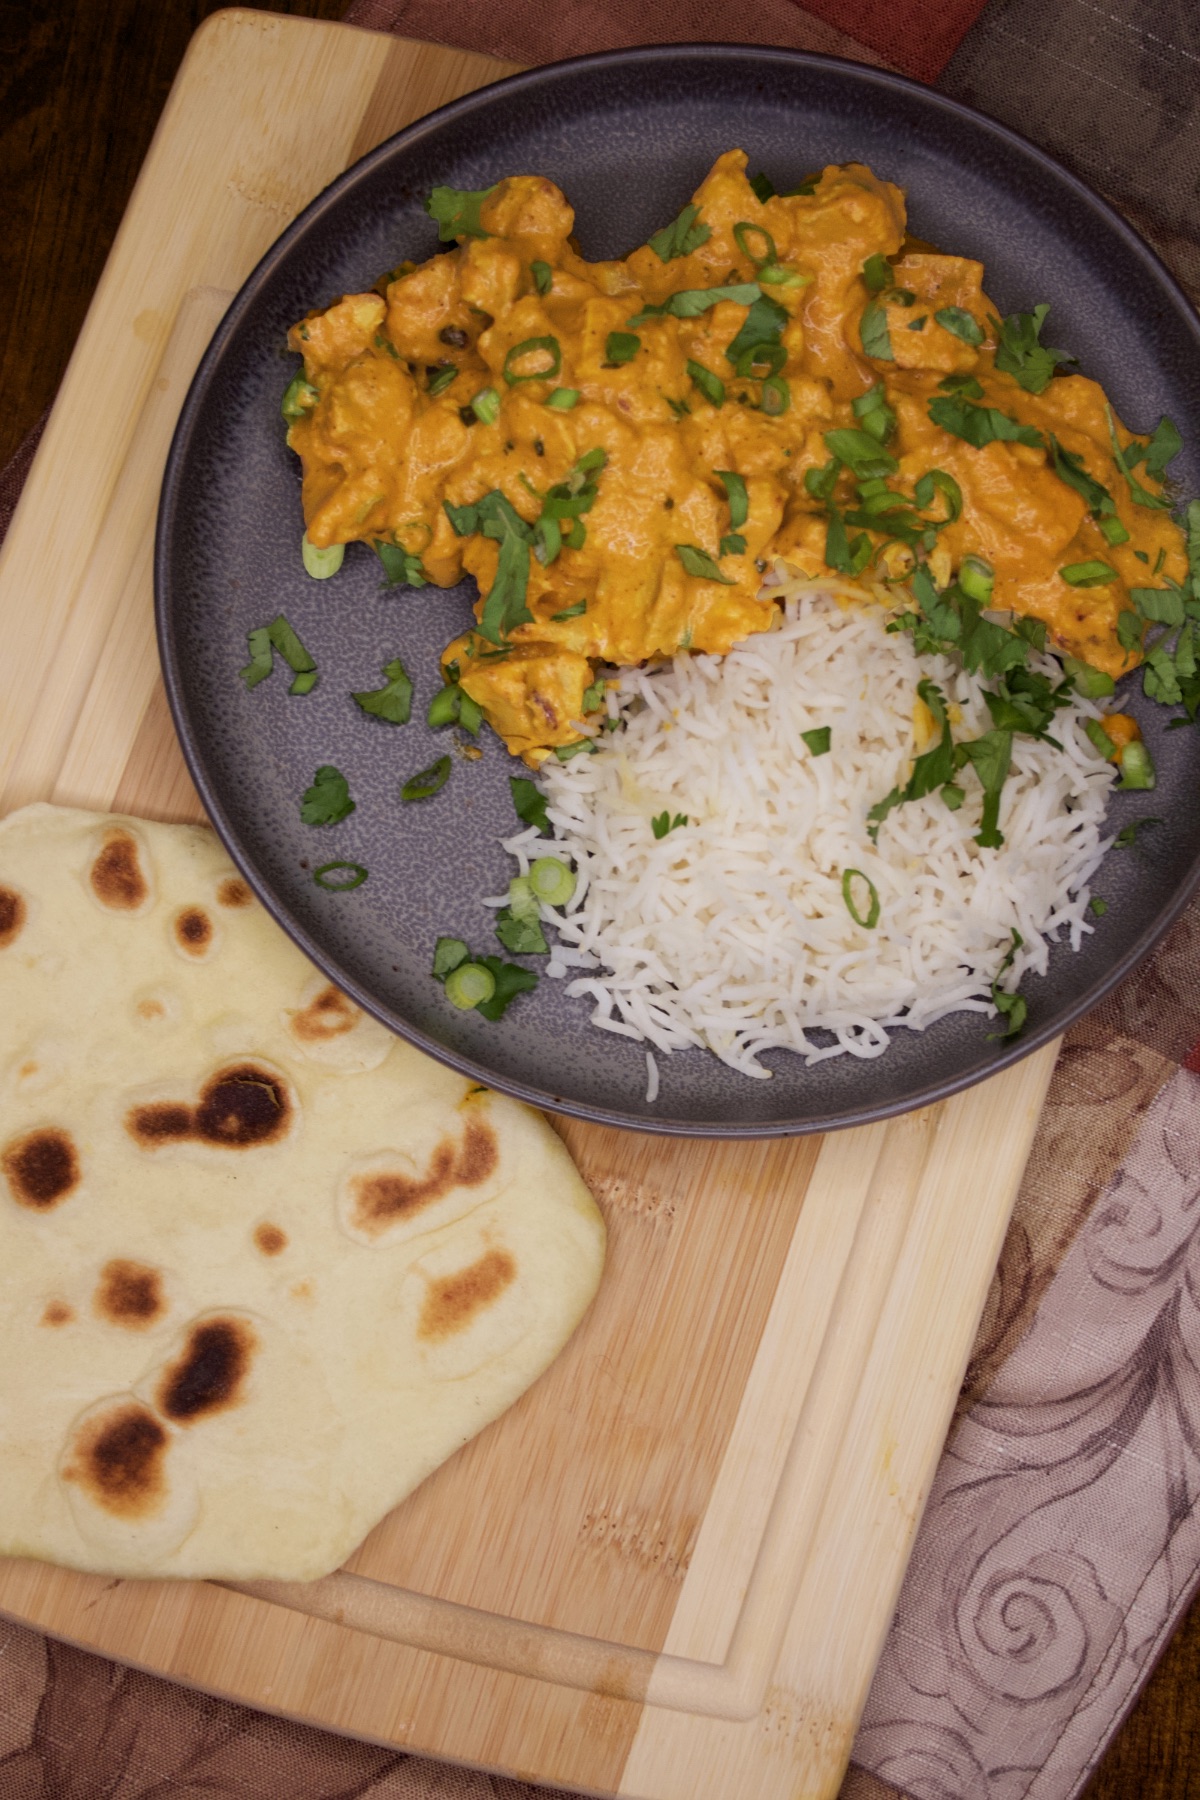 A serving of butter chicken, garnished with chopped cilantro and sliced onions, served with jasmine rice and naan.